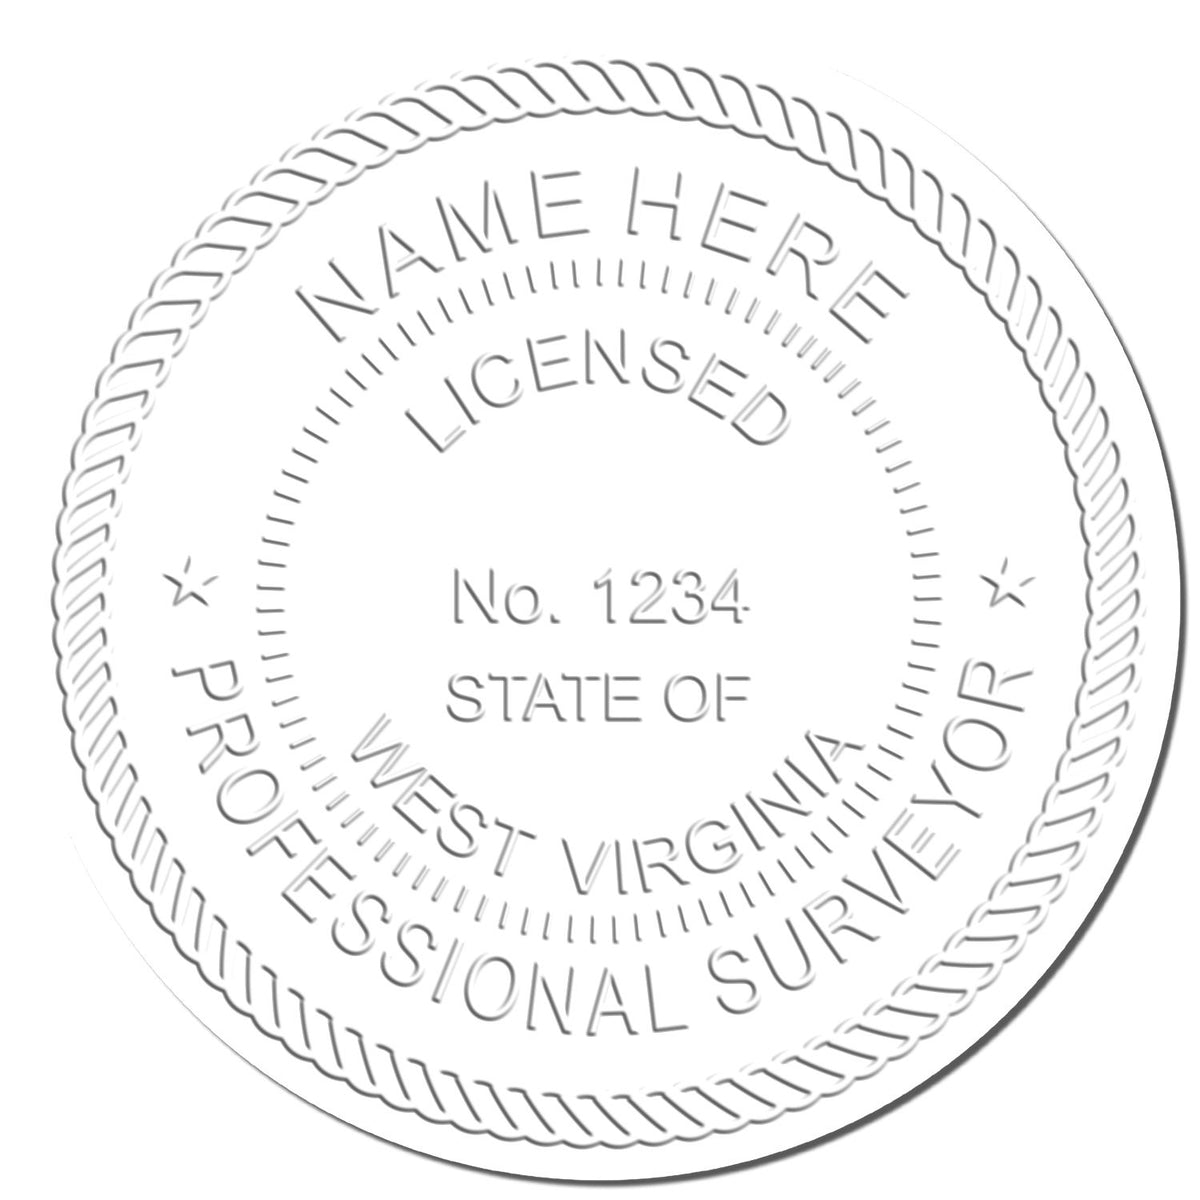 This paper is stamped with a sample imprint of the Gift West Virginia Land Surveyor Seal, signifying its quality and reliability.